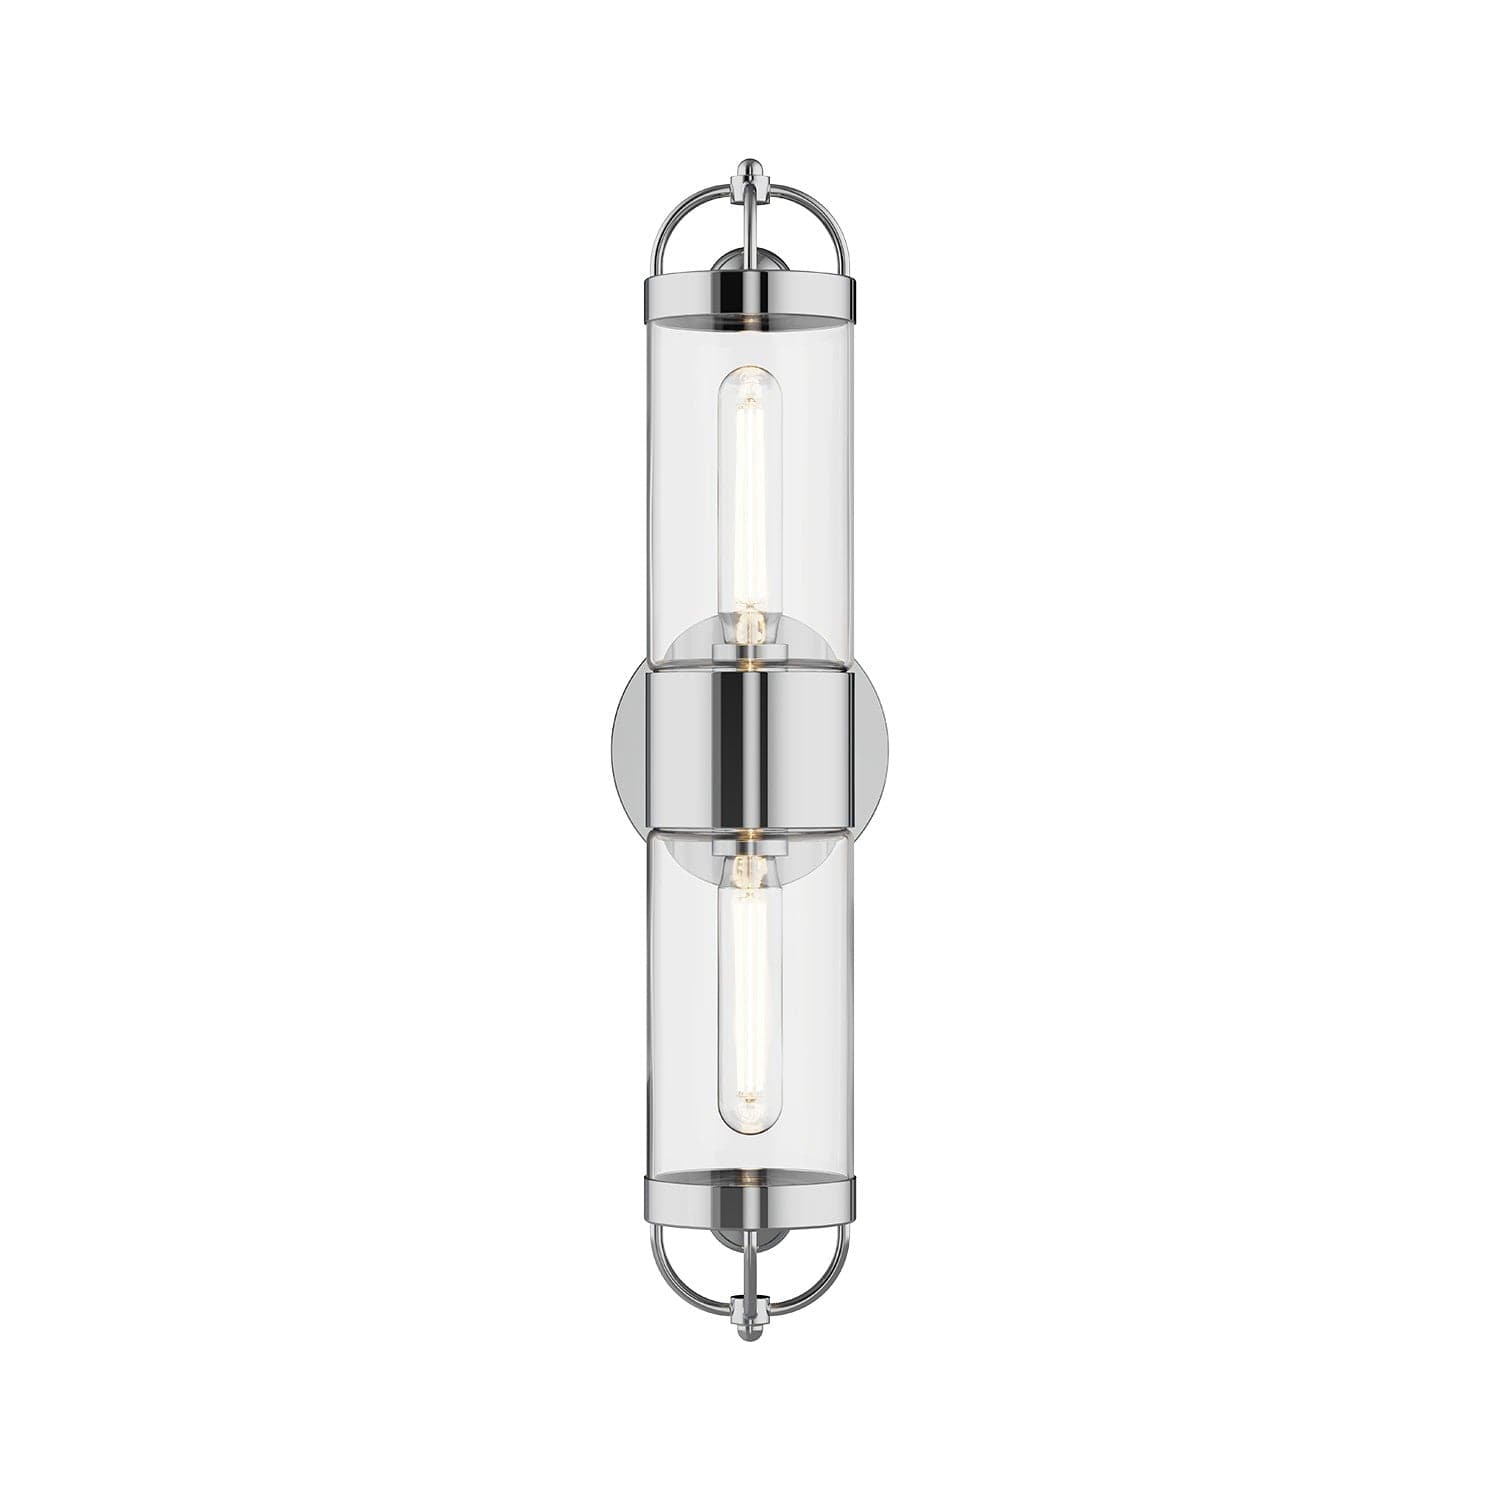 Alora - WV461102CH - Two Light Wall Sconce - Lancaster - Chrome